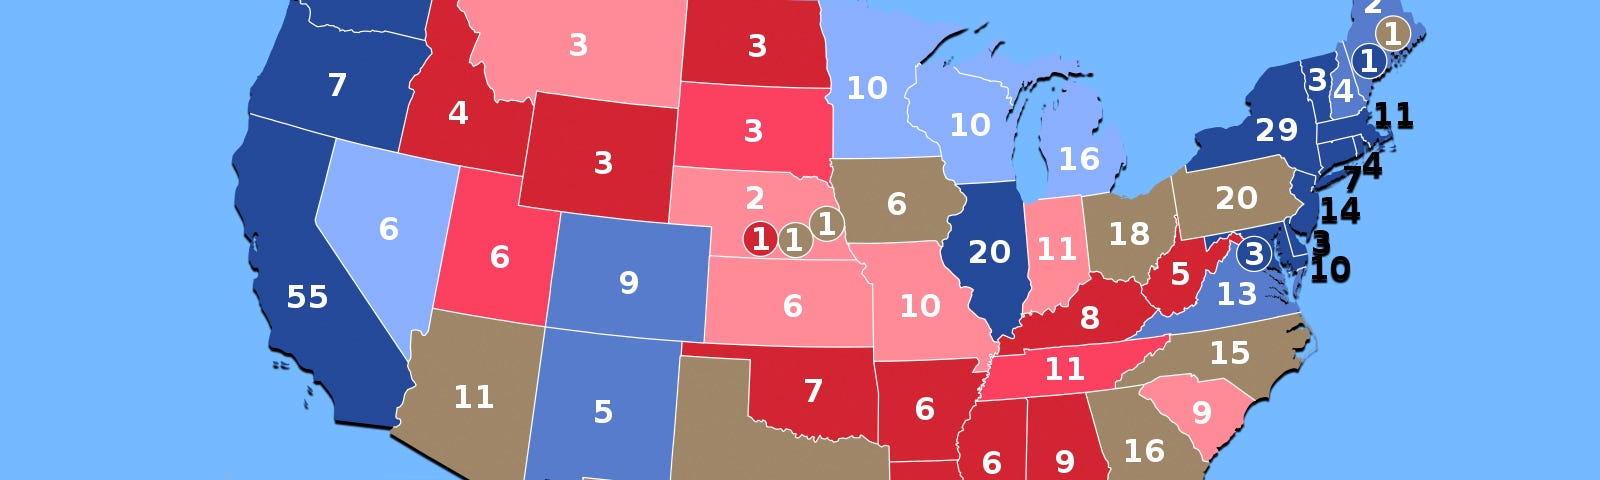 map of the united states with each state’s number of electoral votes and party-majority color